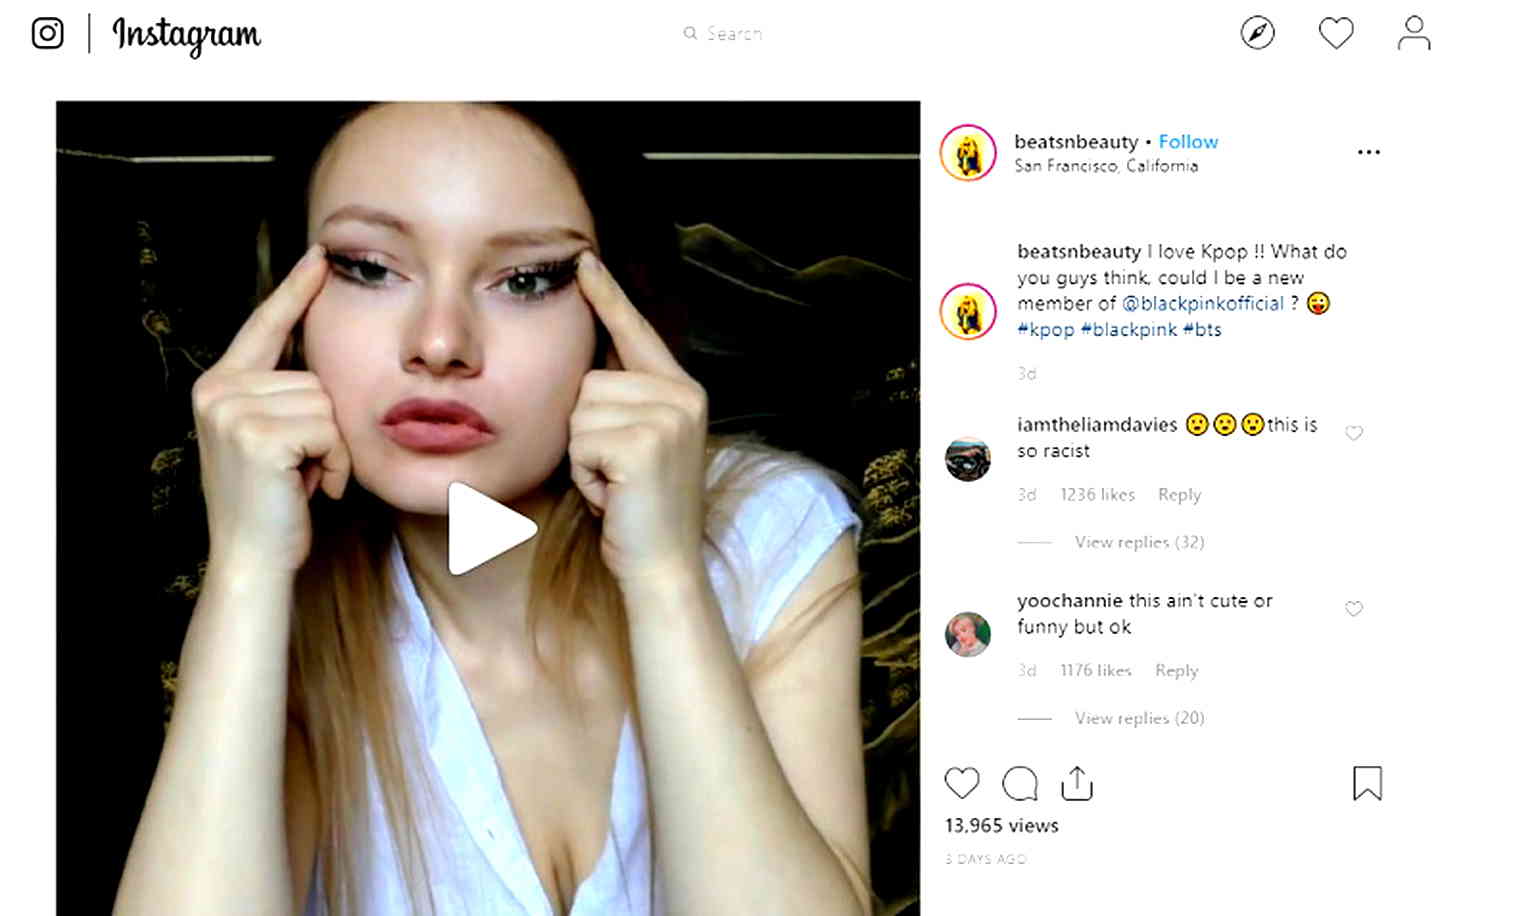 Sofia Valentini, who goes by the IG handle name of @beatsnbeauty, posted the incredibly racist video on Saturday where she expressed her “love” for K-pop (Korean pop) in the caption; however, the video shows a rather different picture than the expressed sentiments in her caption.